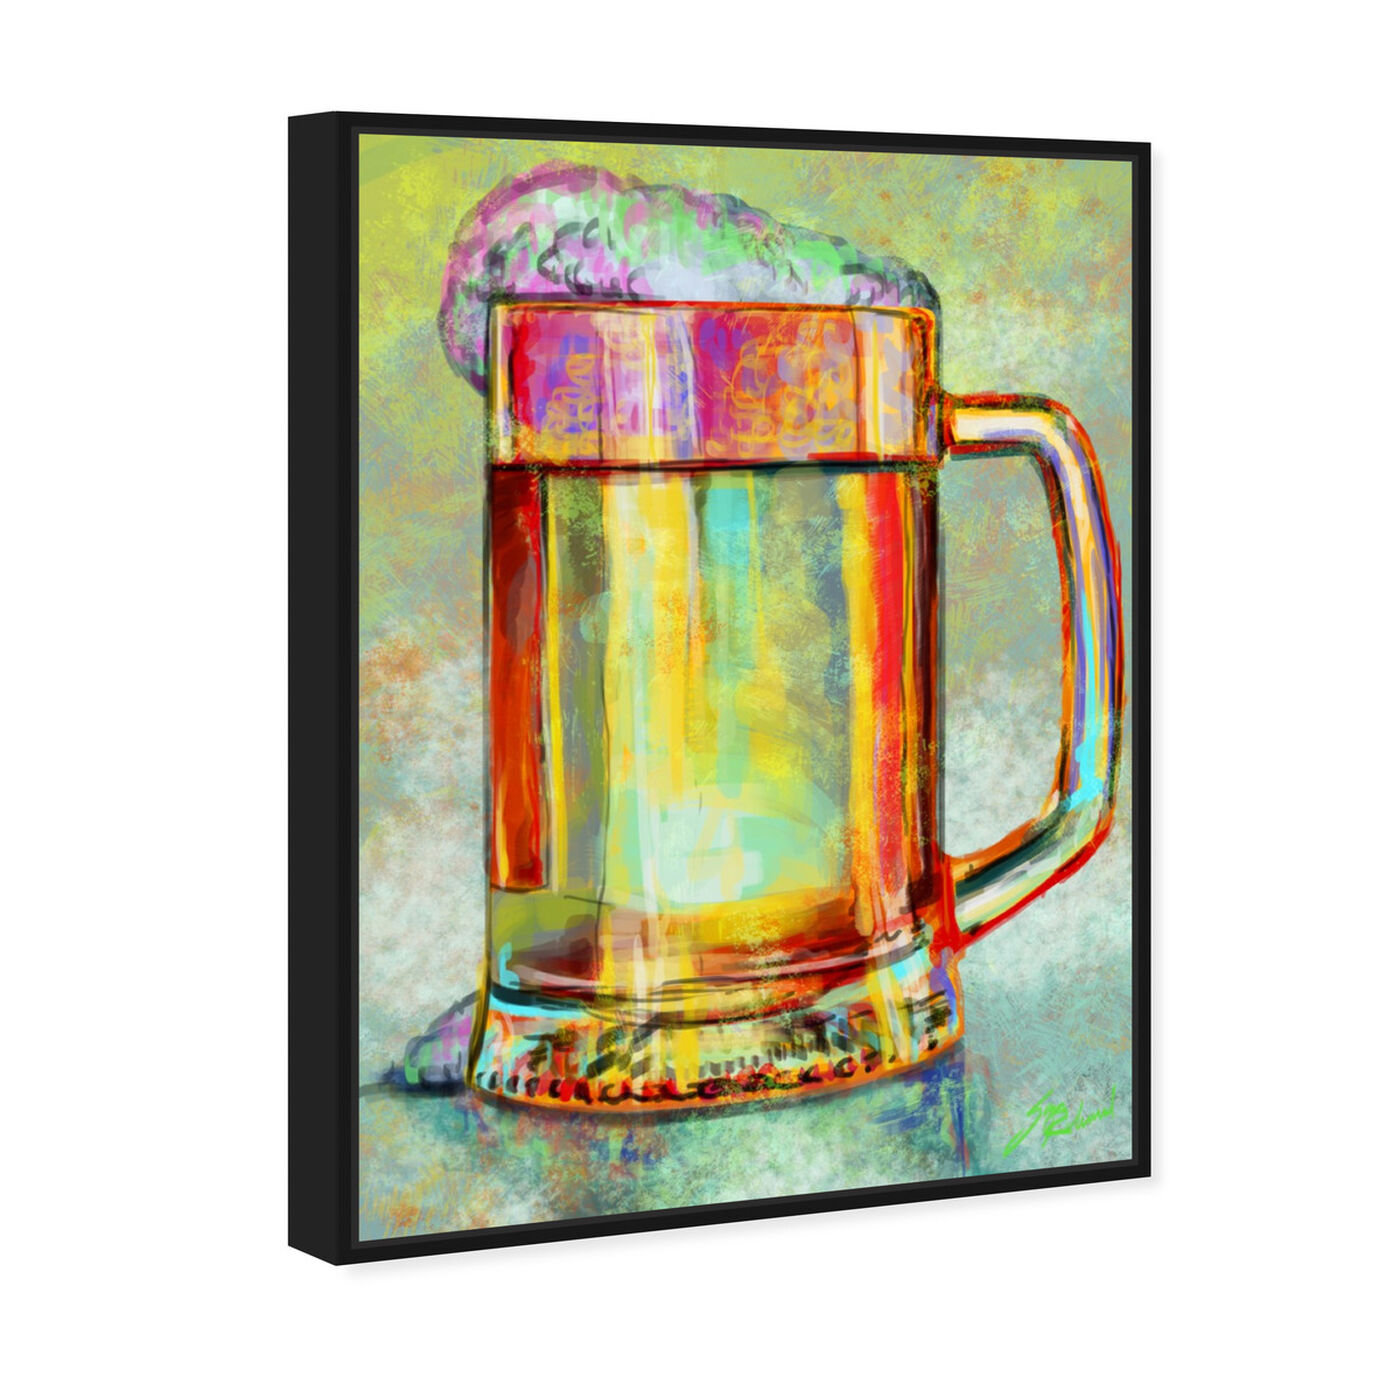 Angled view of Beer Mug featuring drinks and spirits and beer art.